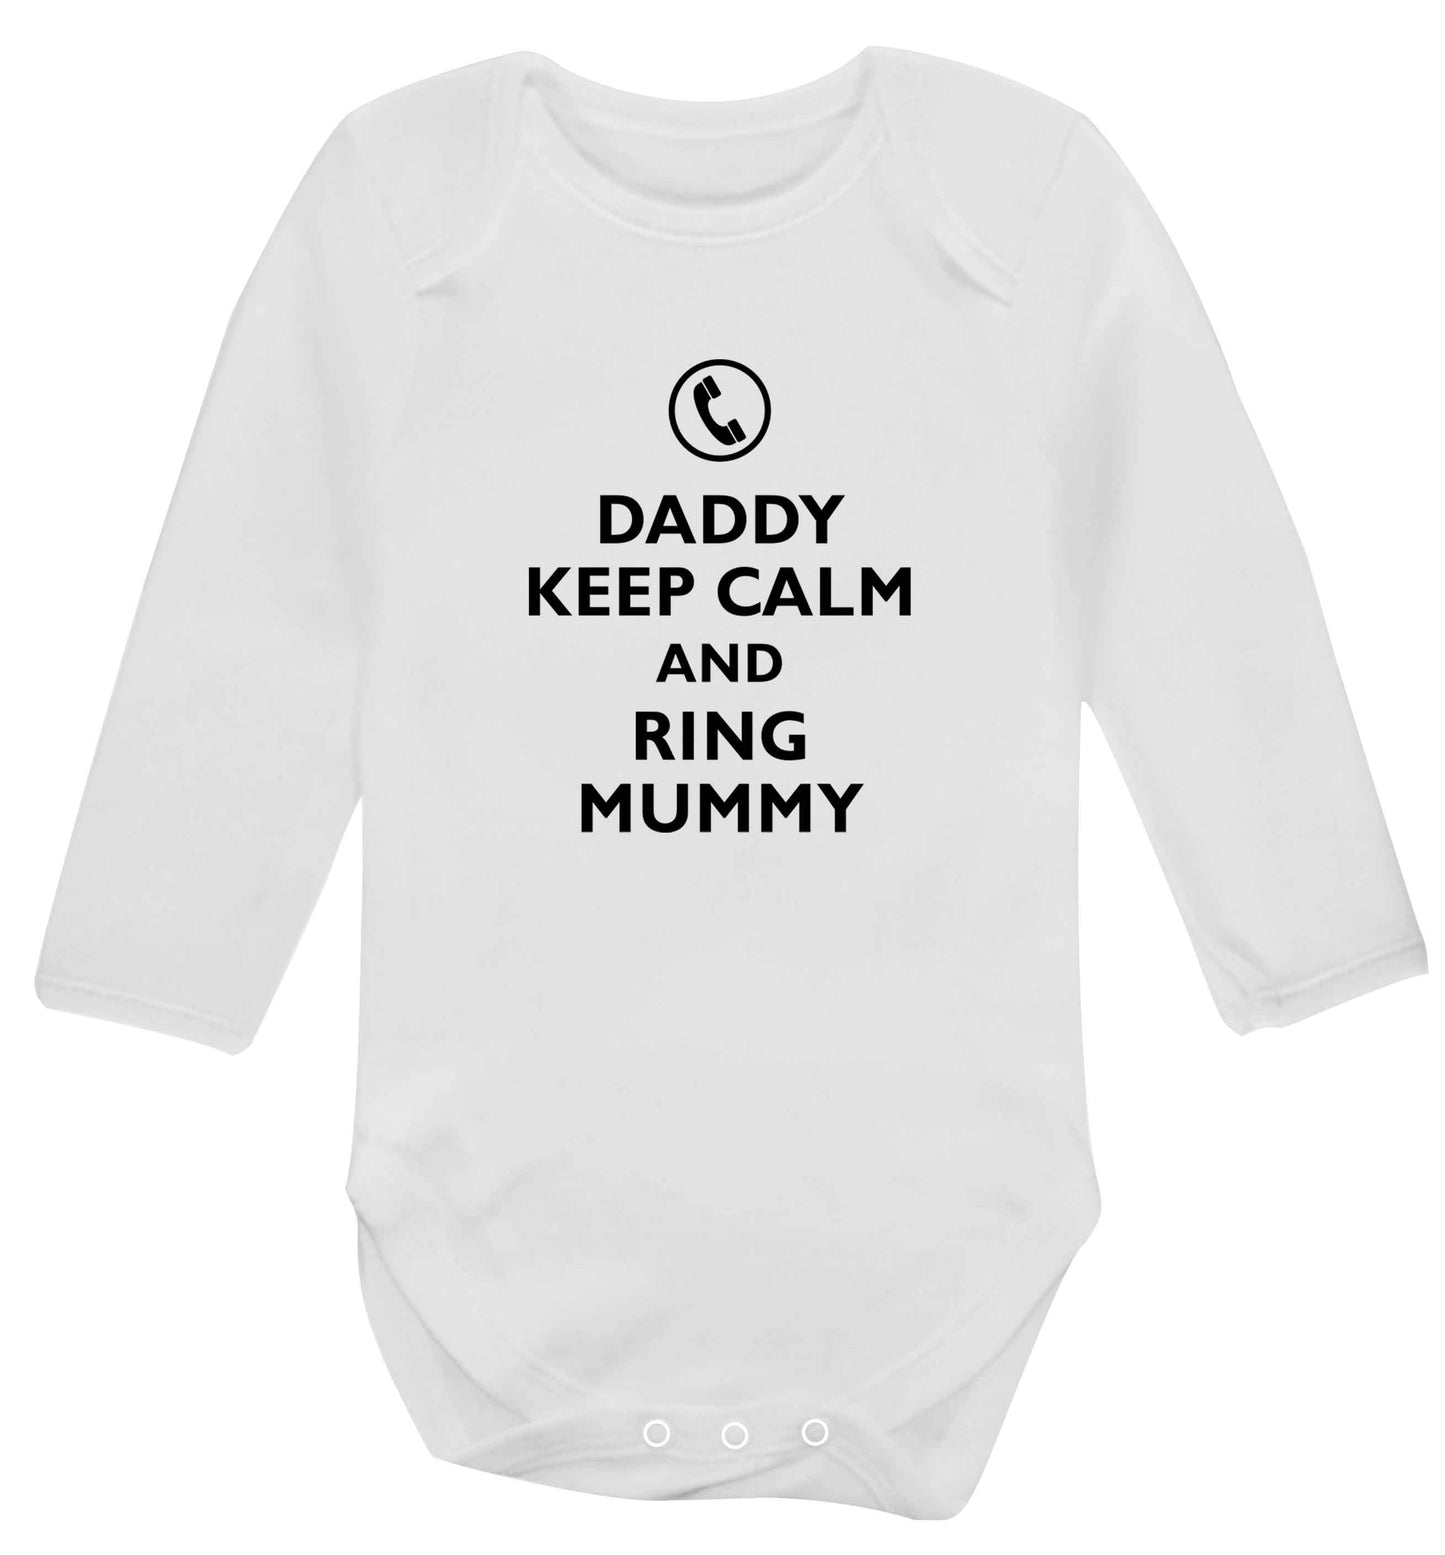 Daddy keep calm and ring mummy baby vest long sleeved white 6-12 months